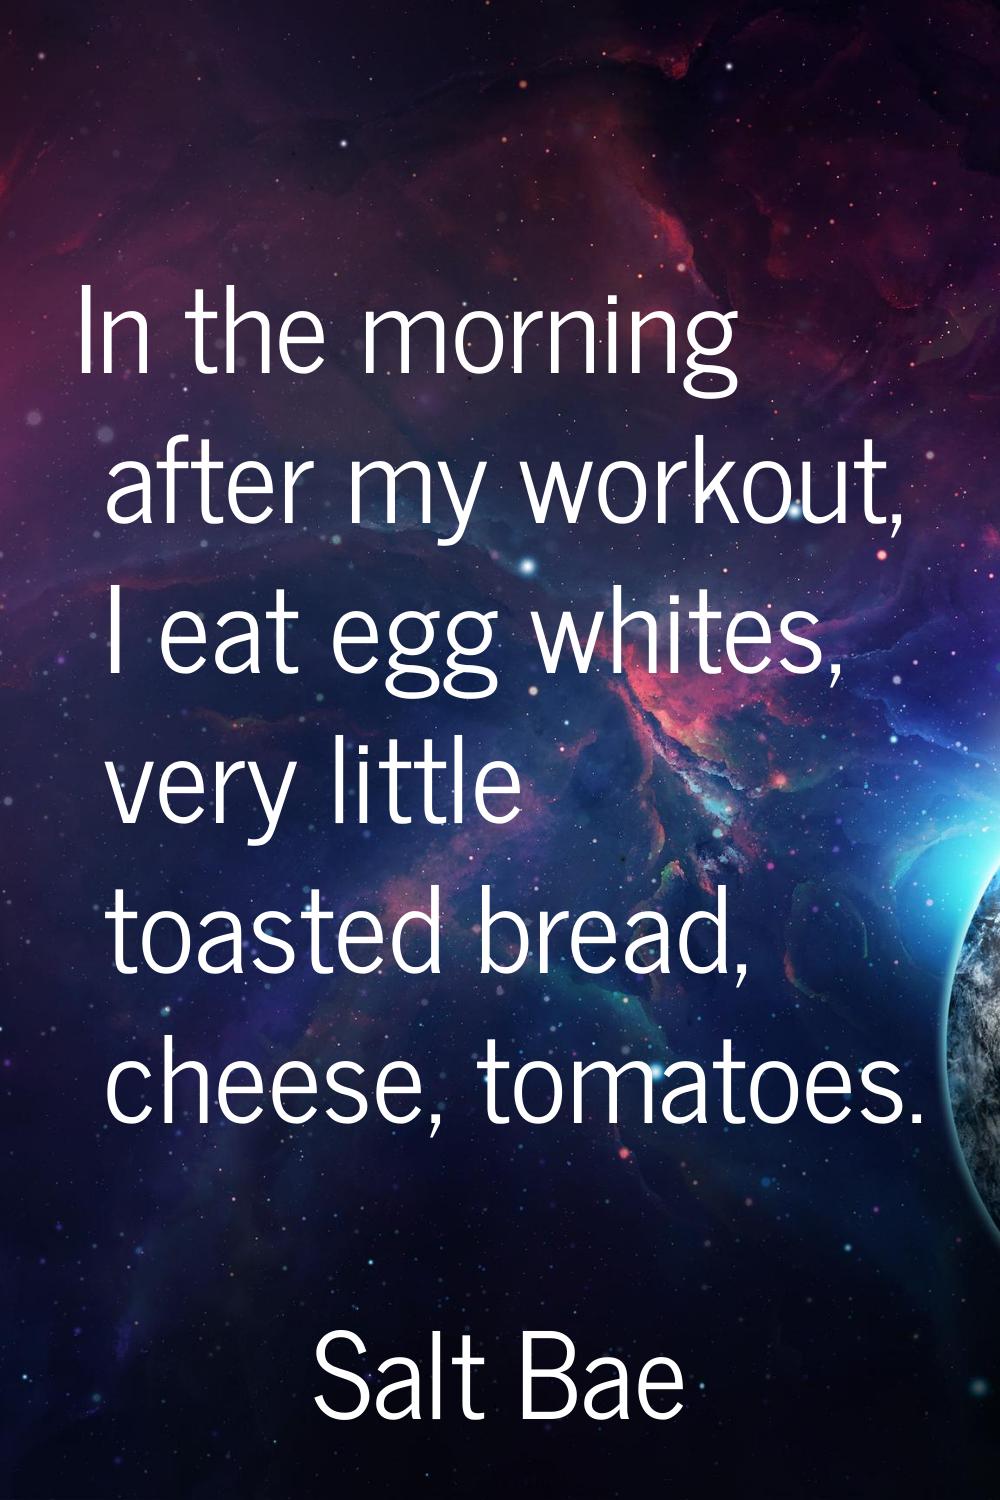 In the morning after my workout, I eat egg whites, very little toasted bread, cheese, tomatoes.